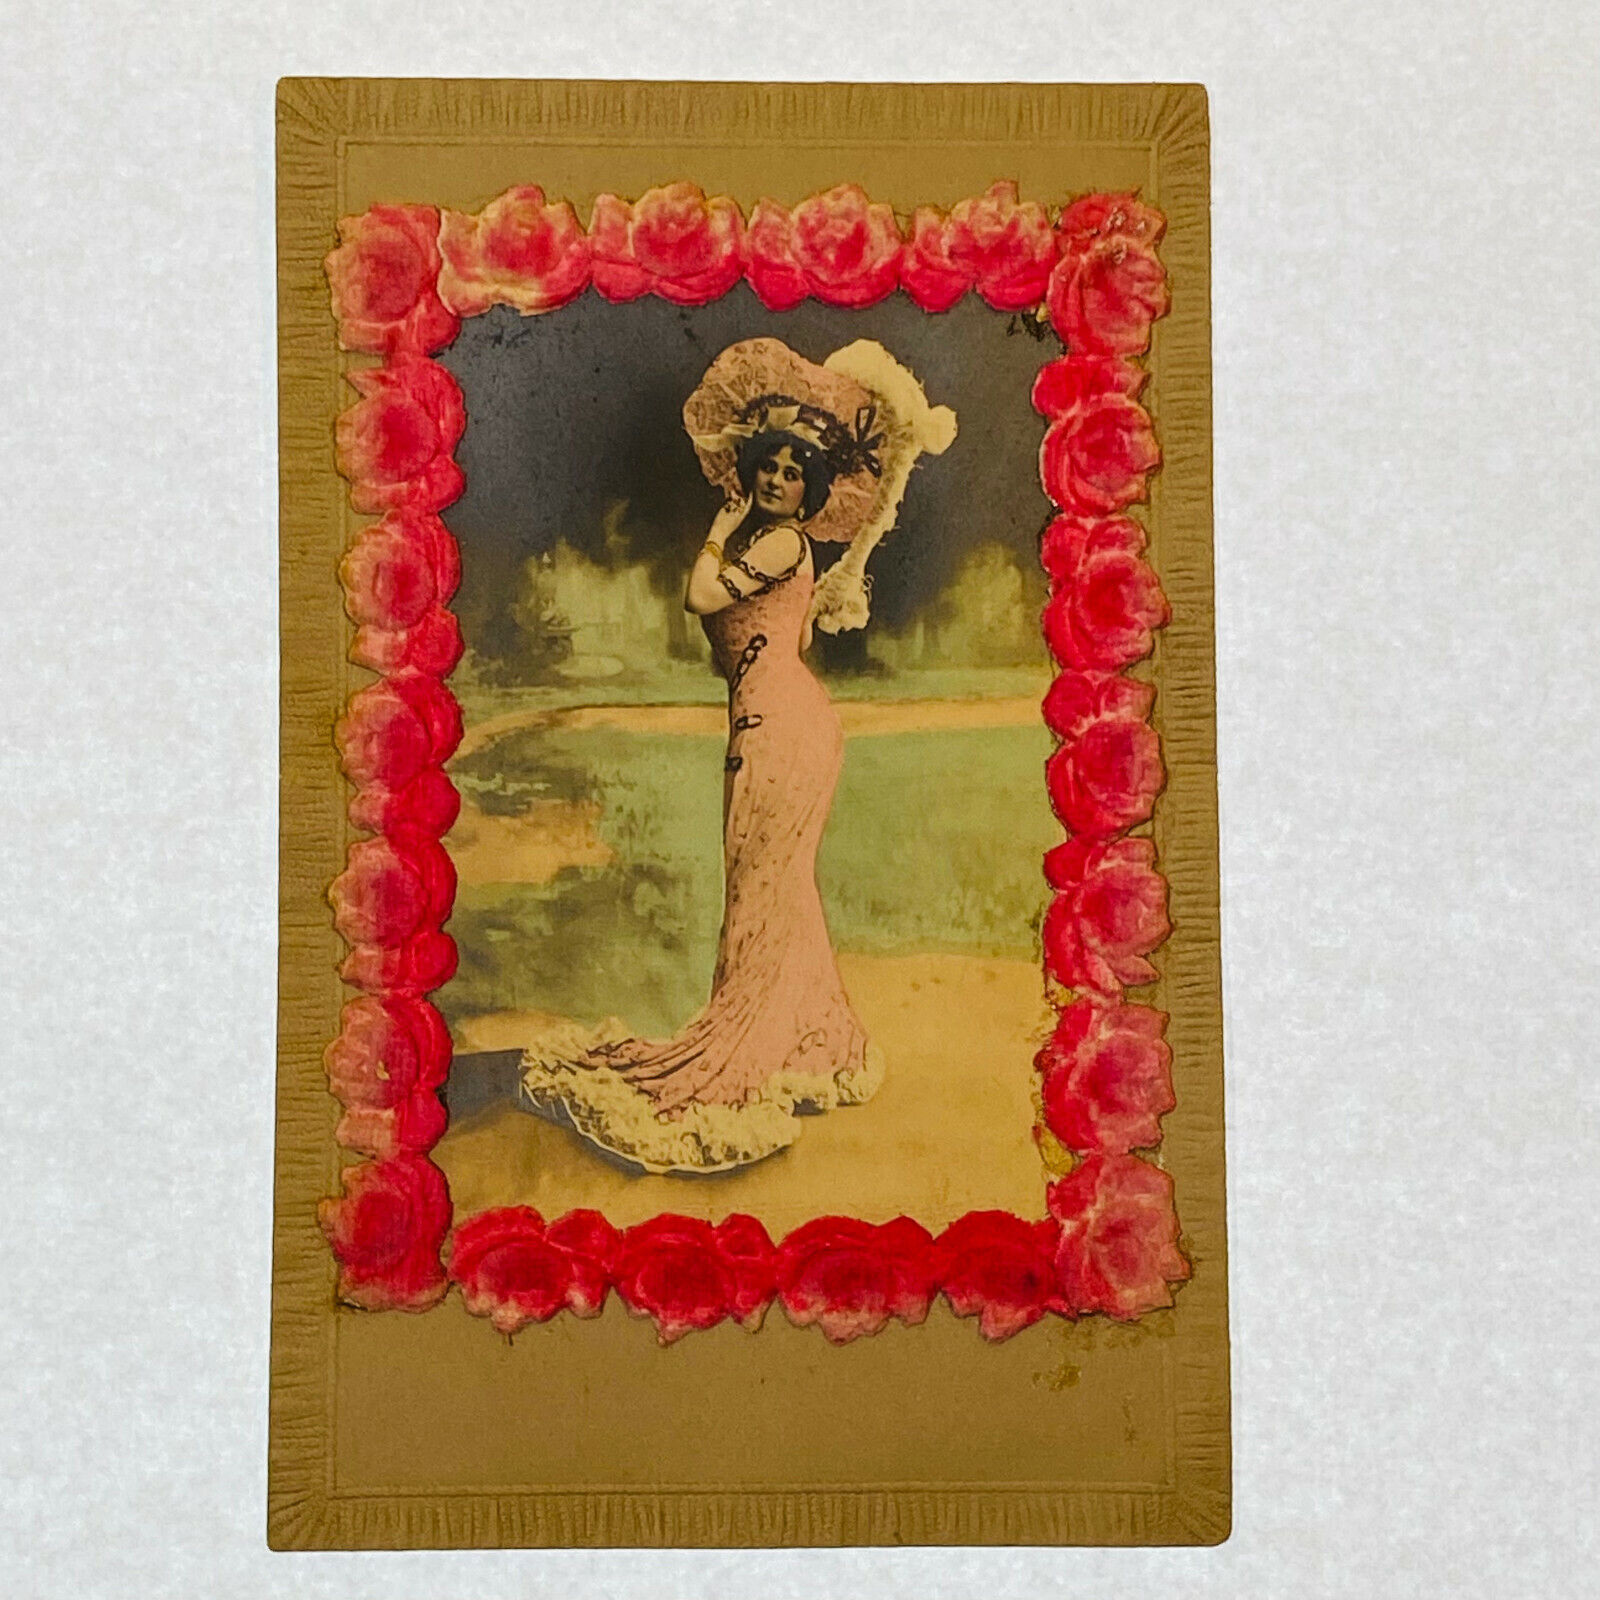 Vintage Antique Victorian Lady With Large Hat and Border of Roses Postcard 